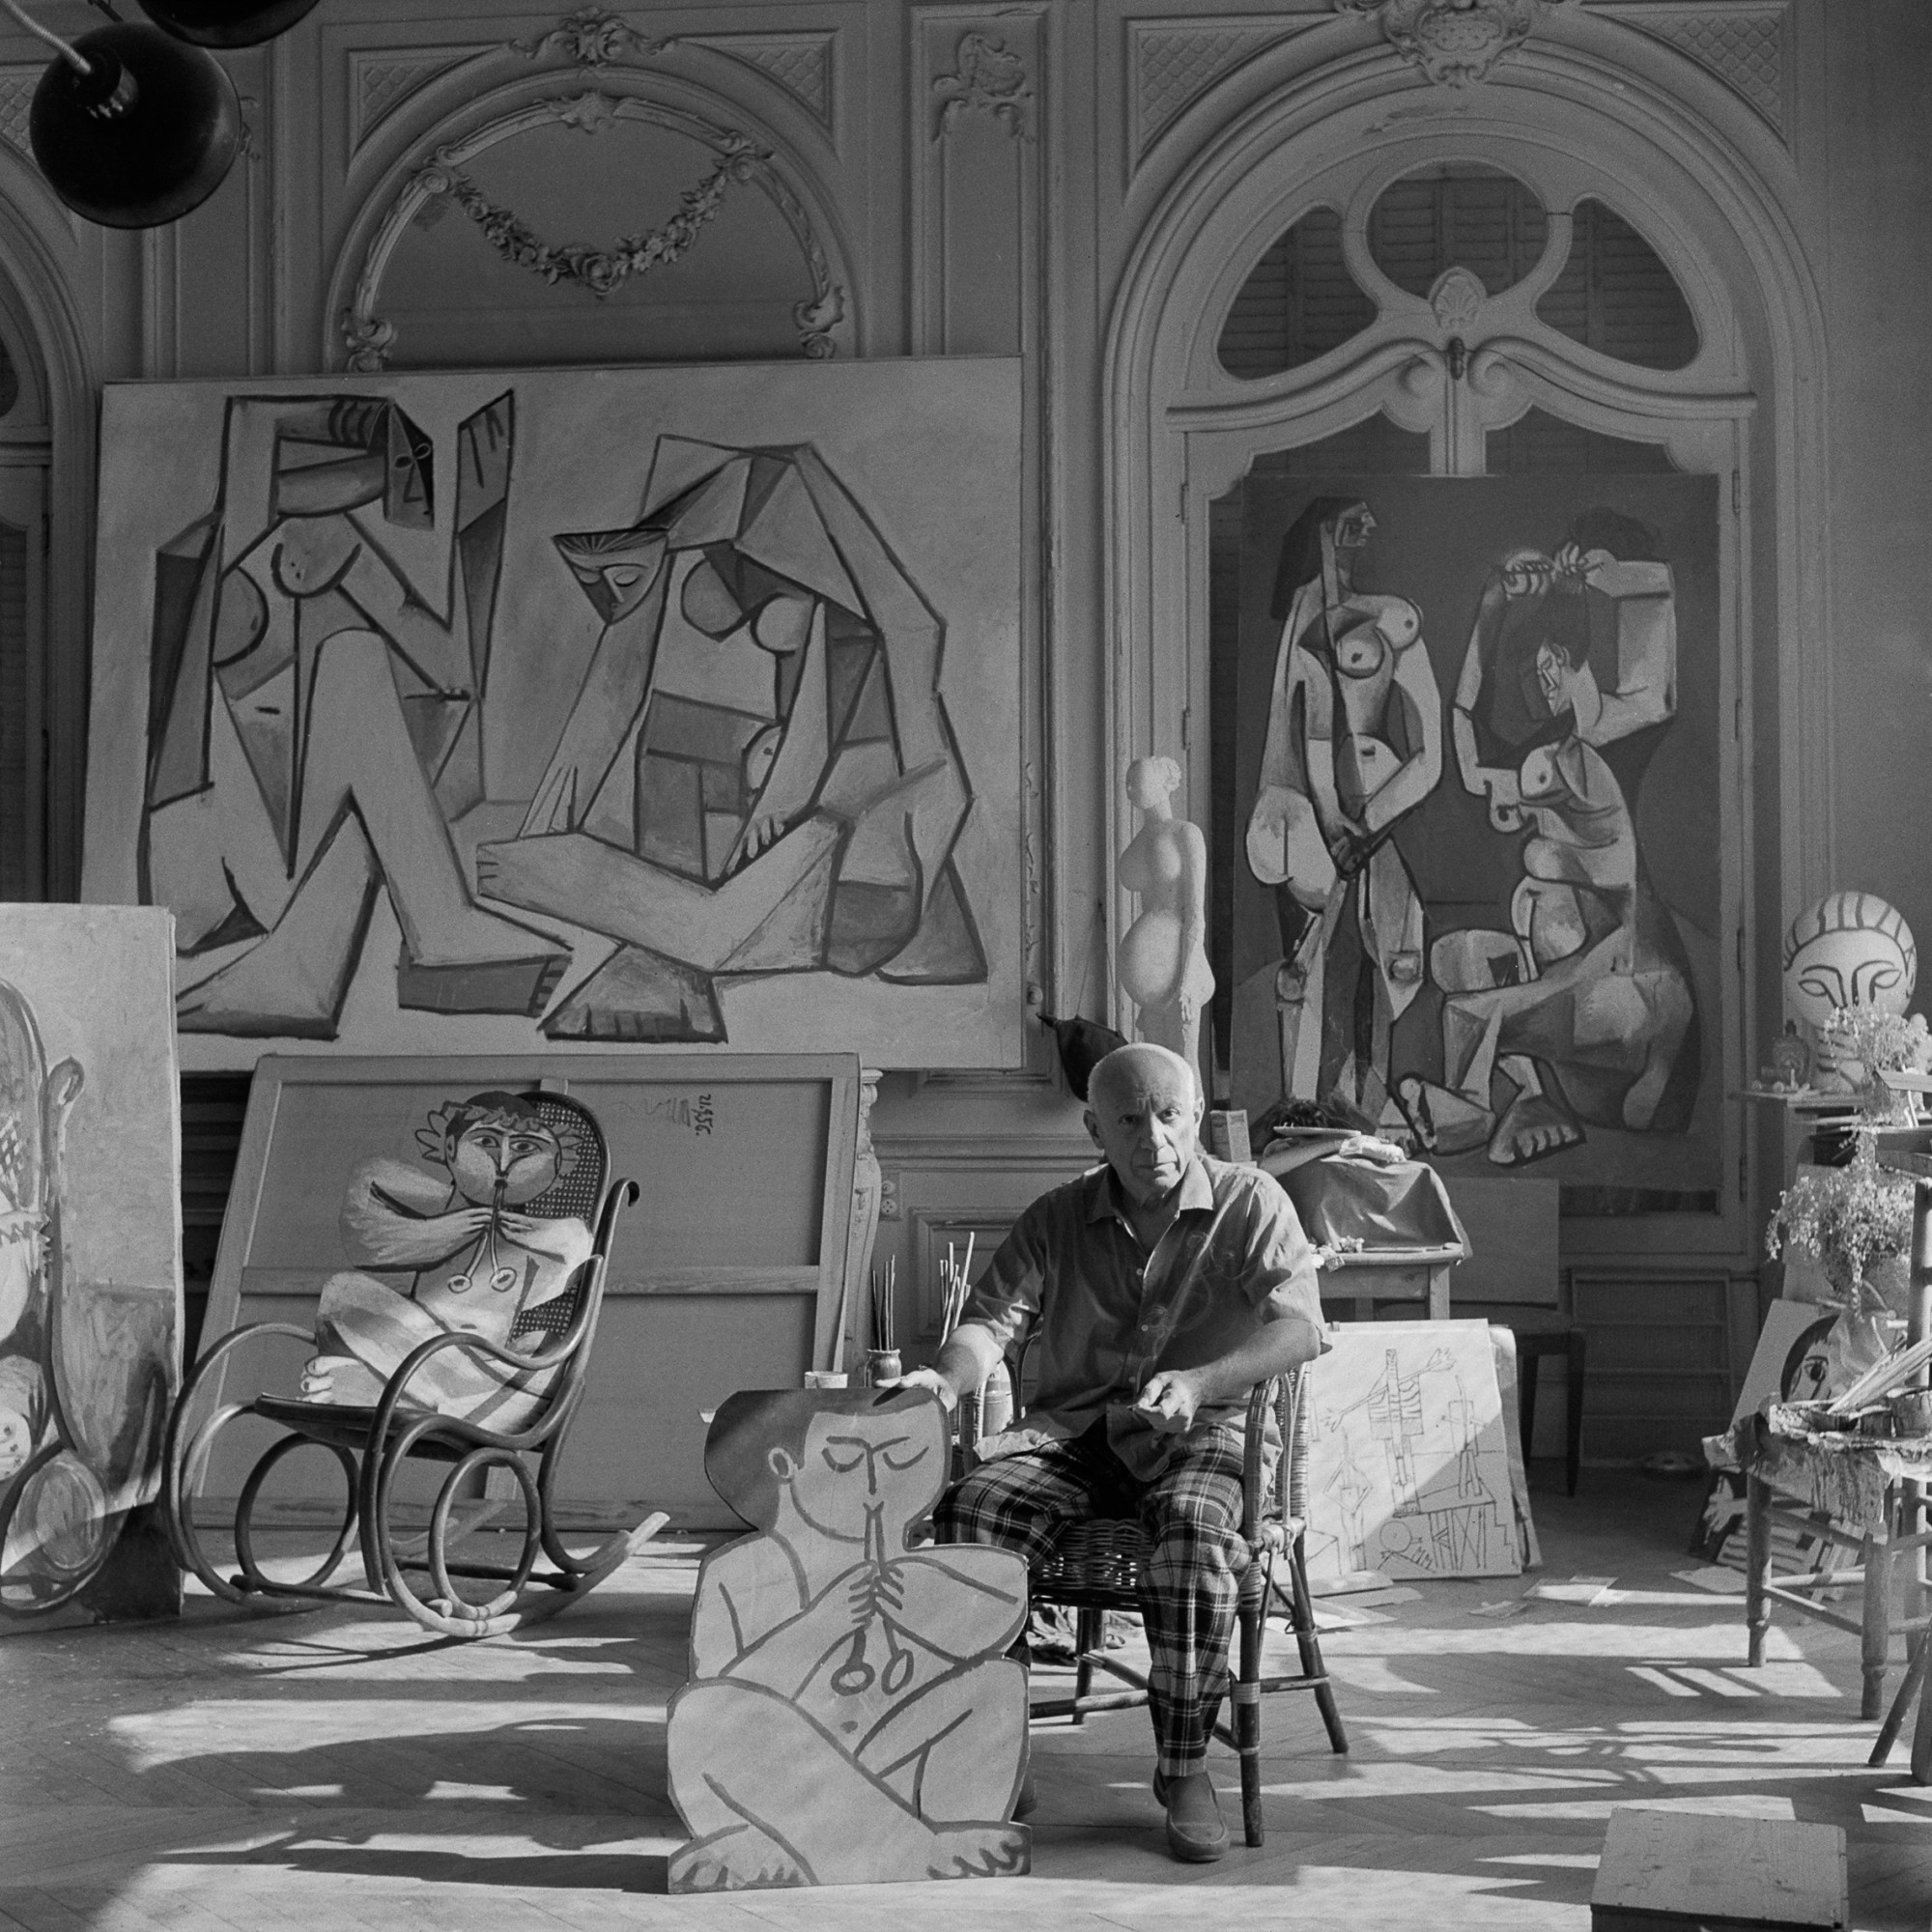 PABLO PICASSO HOLDING A CUTOUT FIGURE OF A FAUN, WITH ANOTHER FAUN 'SEATED' ON THE ROCKING CHAIR. BEHIND PABLO PICASSO, TWO PAINTINGS DONE IN . LA CALIFORNIE, CANNES by Edward Quinn, 1956